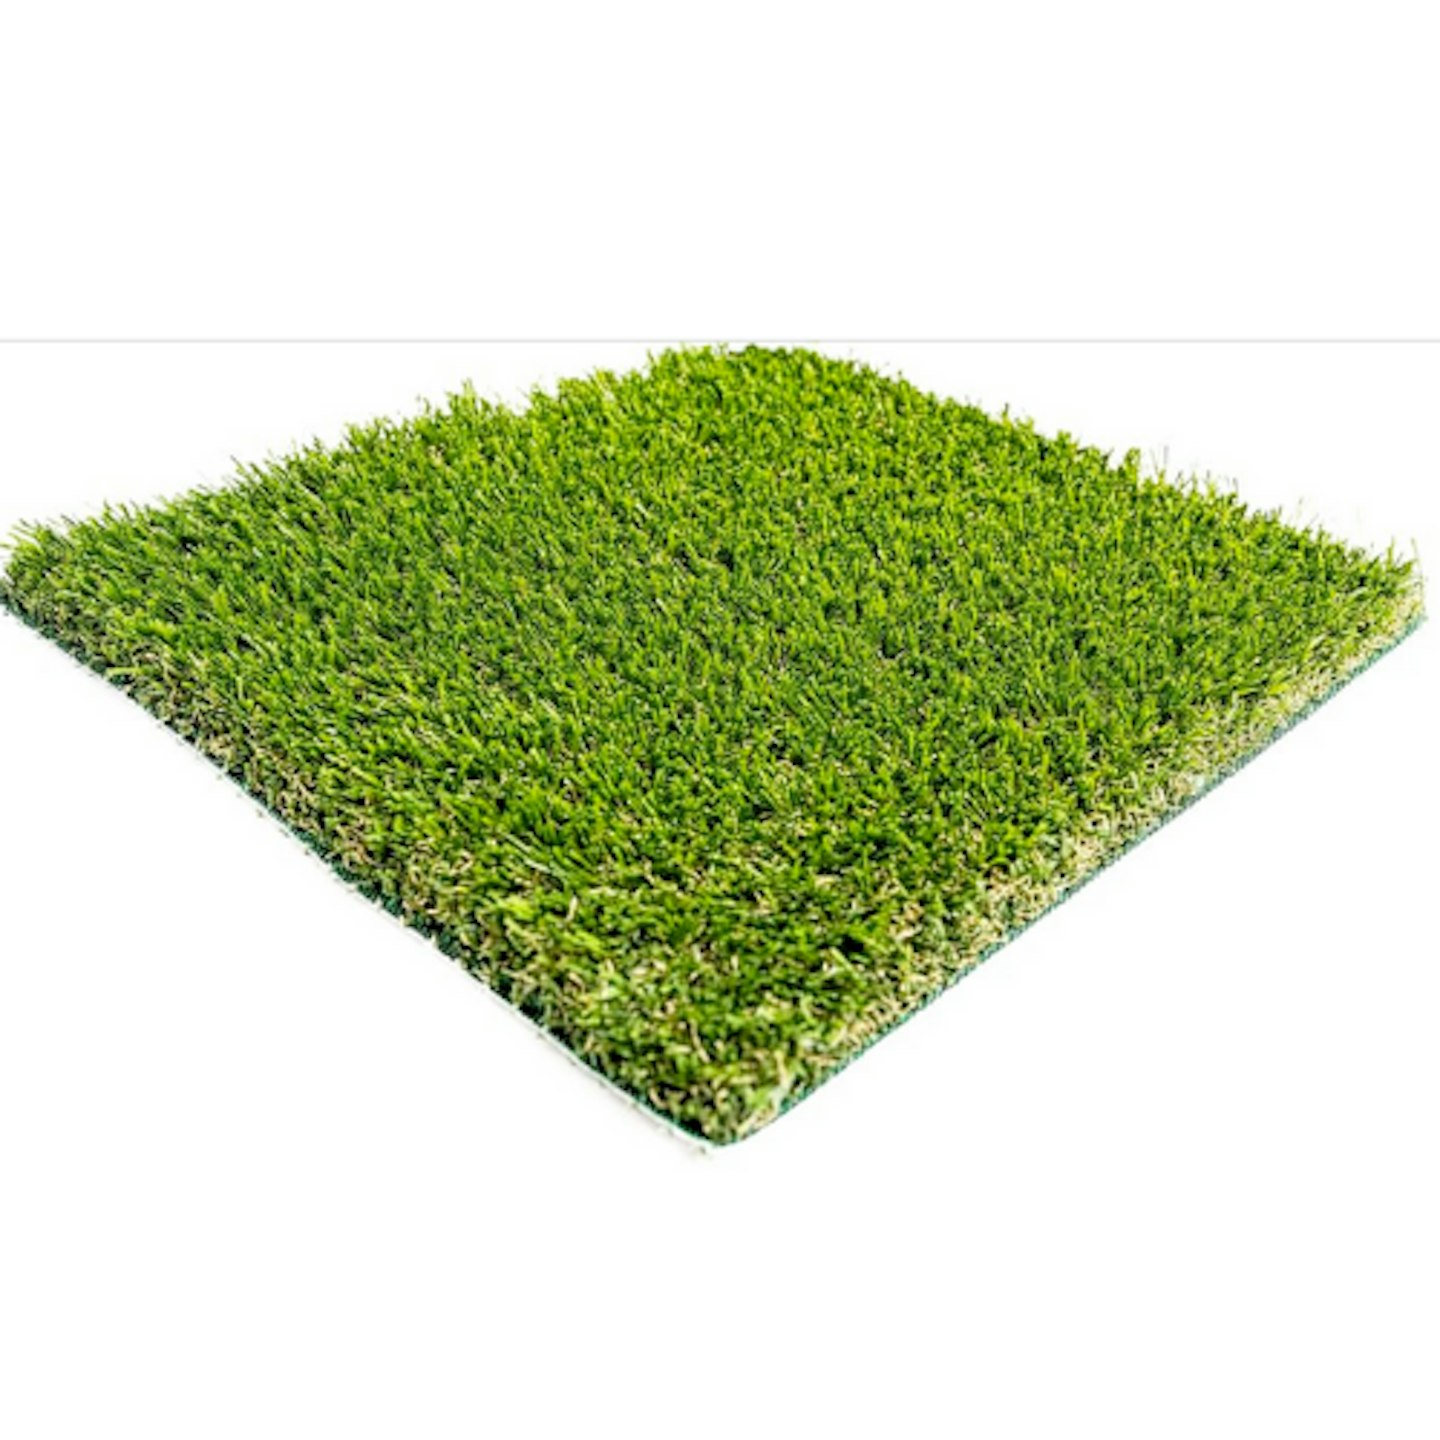 square of recycled plastic artificial grass